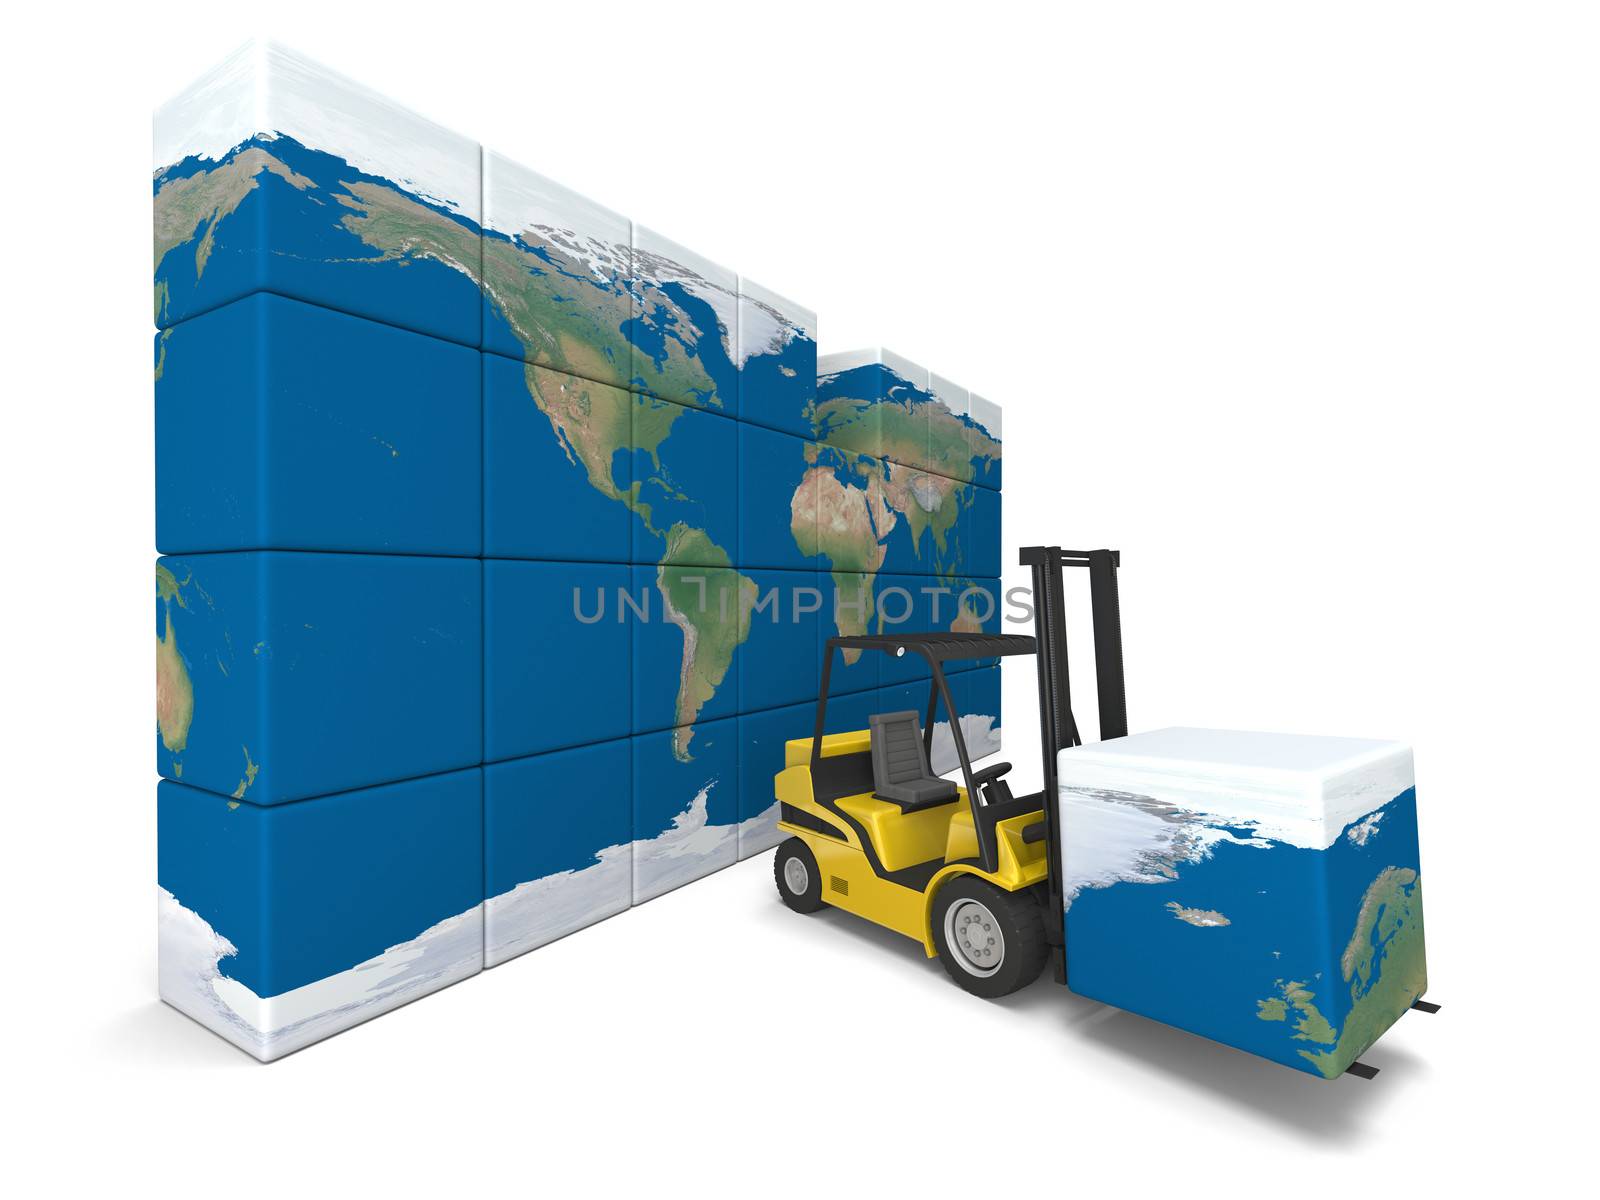 Concept of global transportation, modern yellow forklift carrying piece of global map, isolated on white background. Elements of this image furnished by NASA.